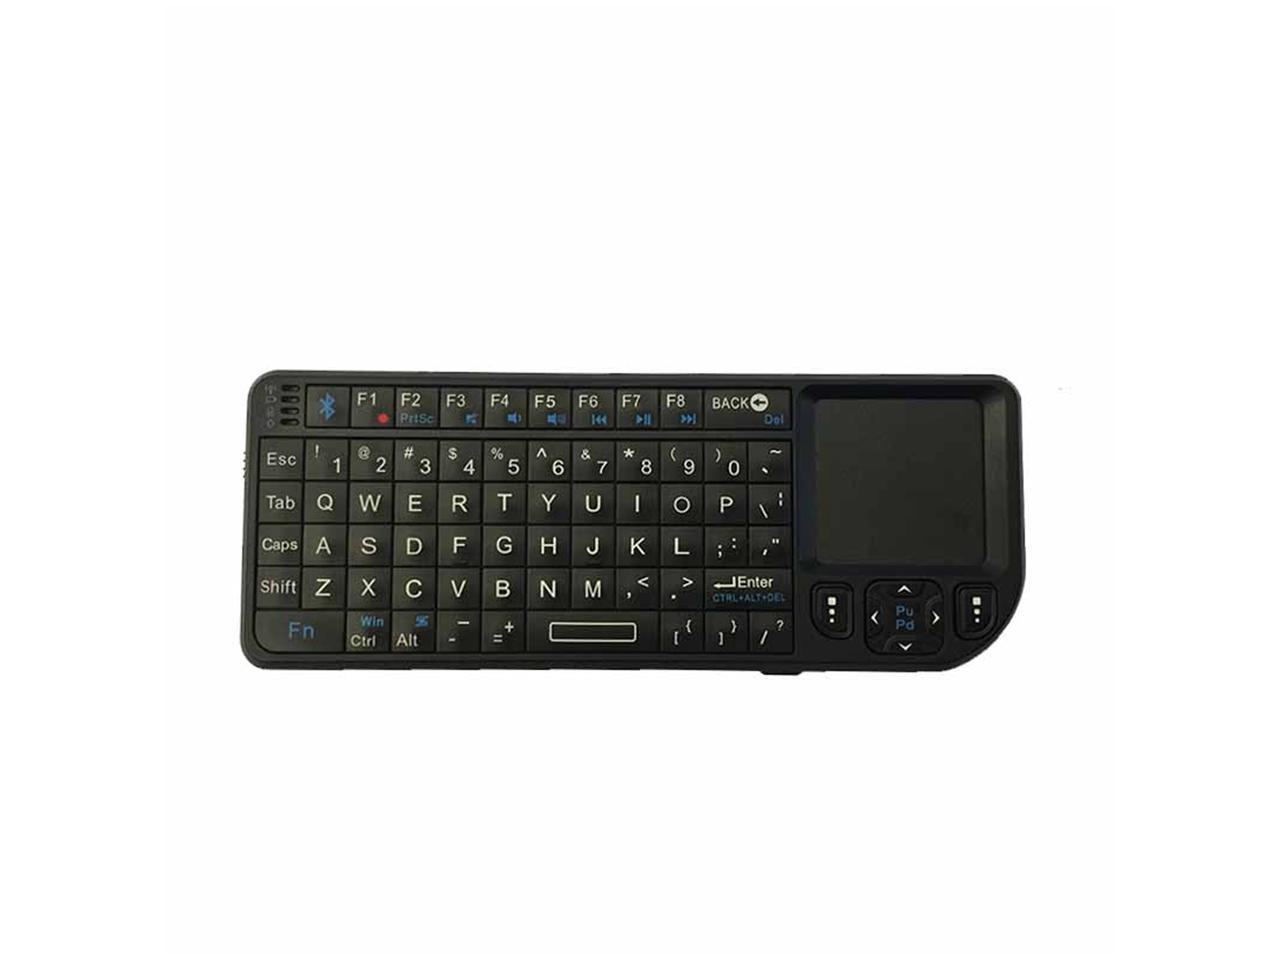 Android 2.4G ABS Mini Multifunctional Backlight Keyboard for PC Laptop H18+ Wireless Bluetooth Keyboard Computer 